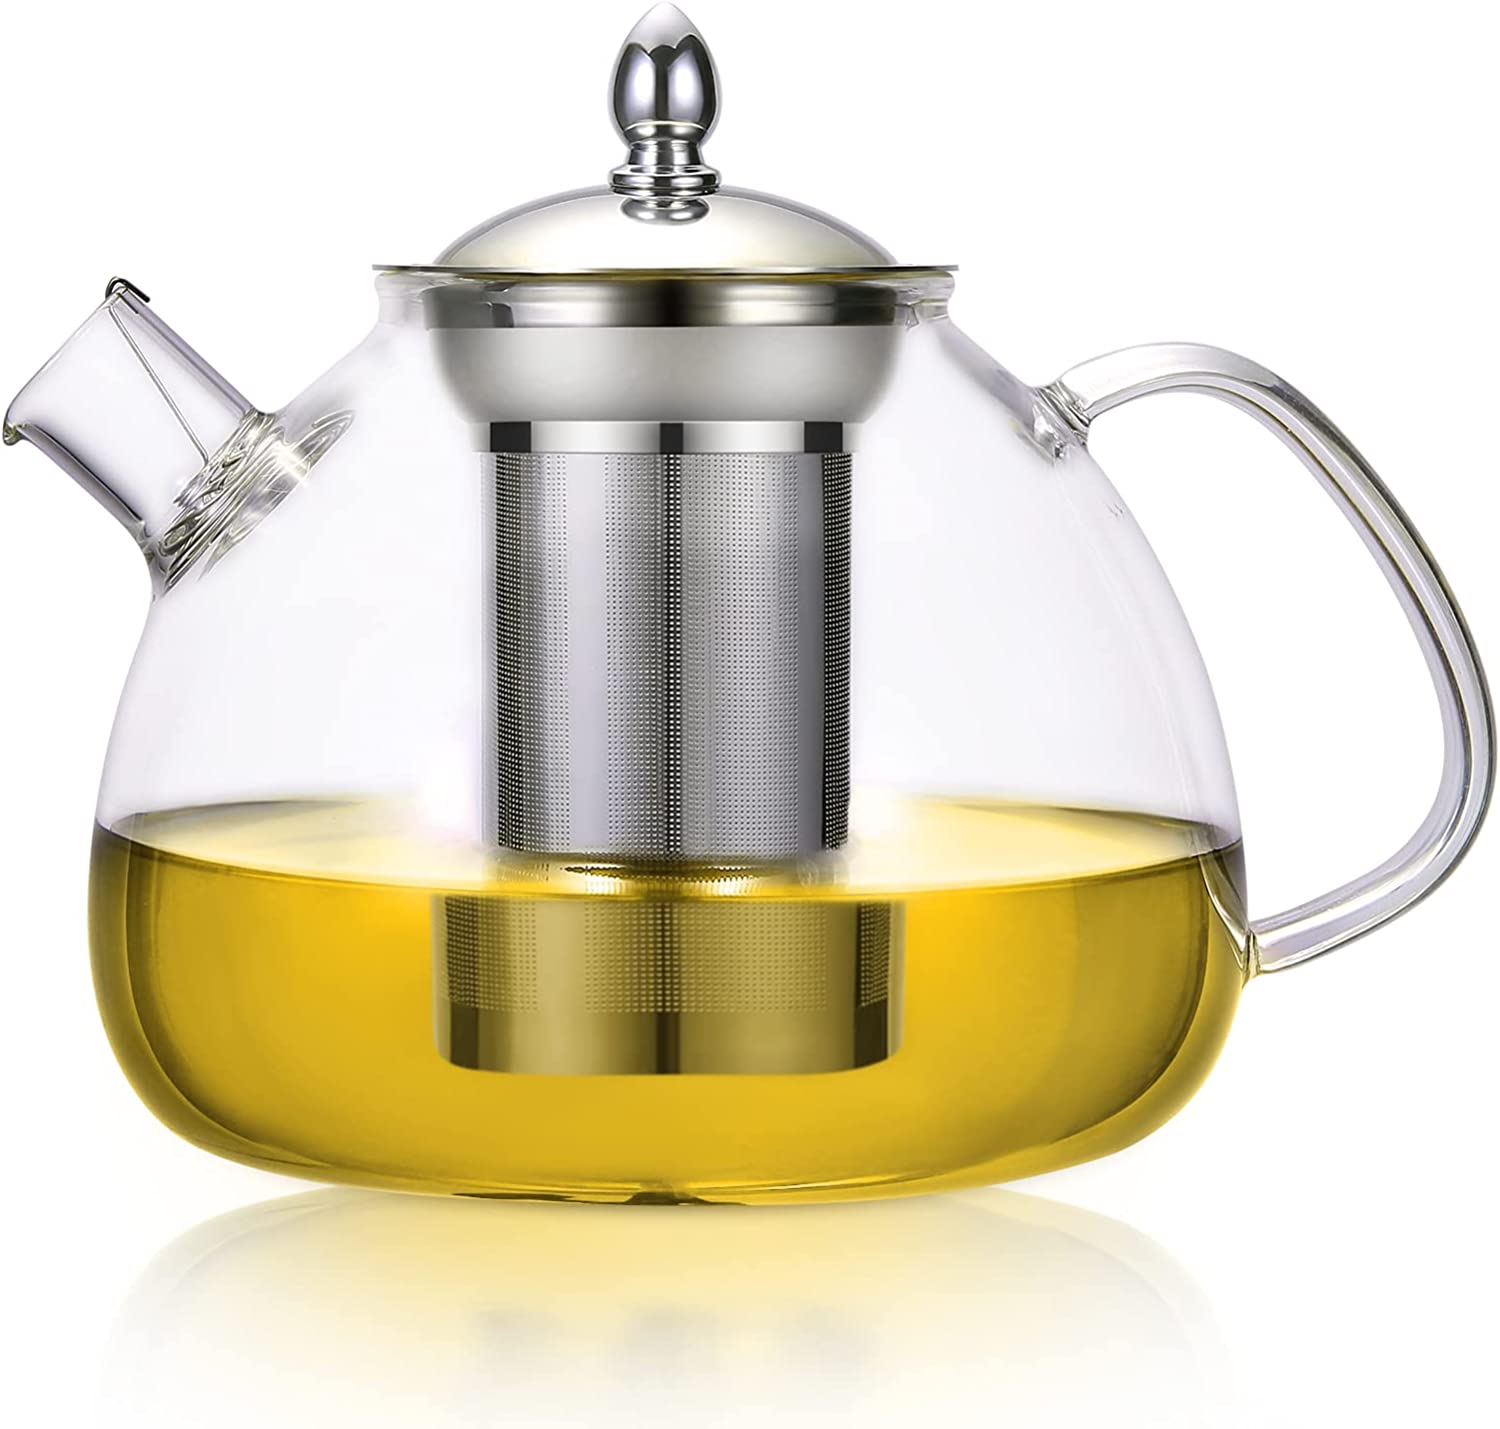 XLL Glass Teapot 1500 ml Glass Kettle Teapot with Stainless Steel Strainer Insert, Heat Resistant Borosilicate Jug Teapot Glass - Filter Spout No Drops, Dishwasher Safe